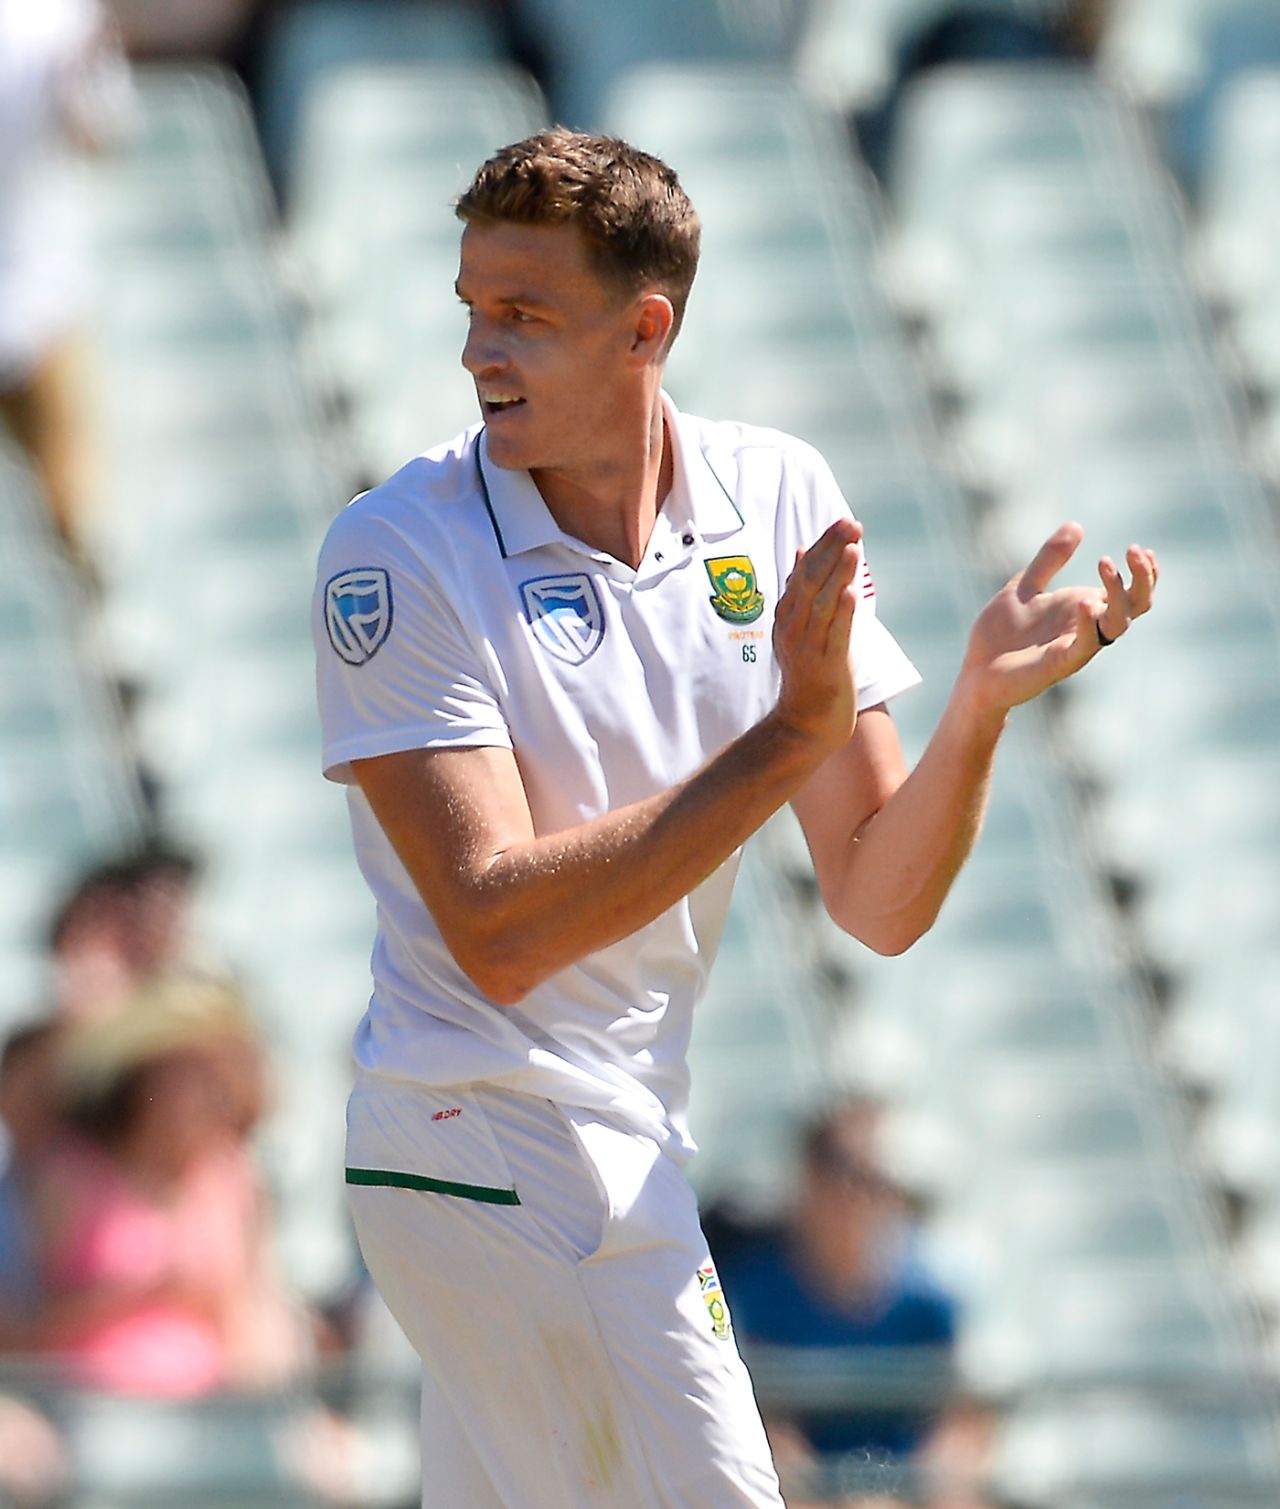 Morne Morkel is delighted after dismissing Usman Khawaja, South Africa v Australia, 3rd Test, Cape Town, 2nd day, March 23, 2018